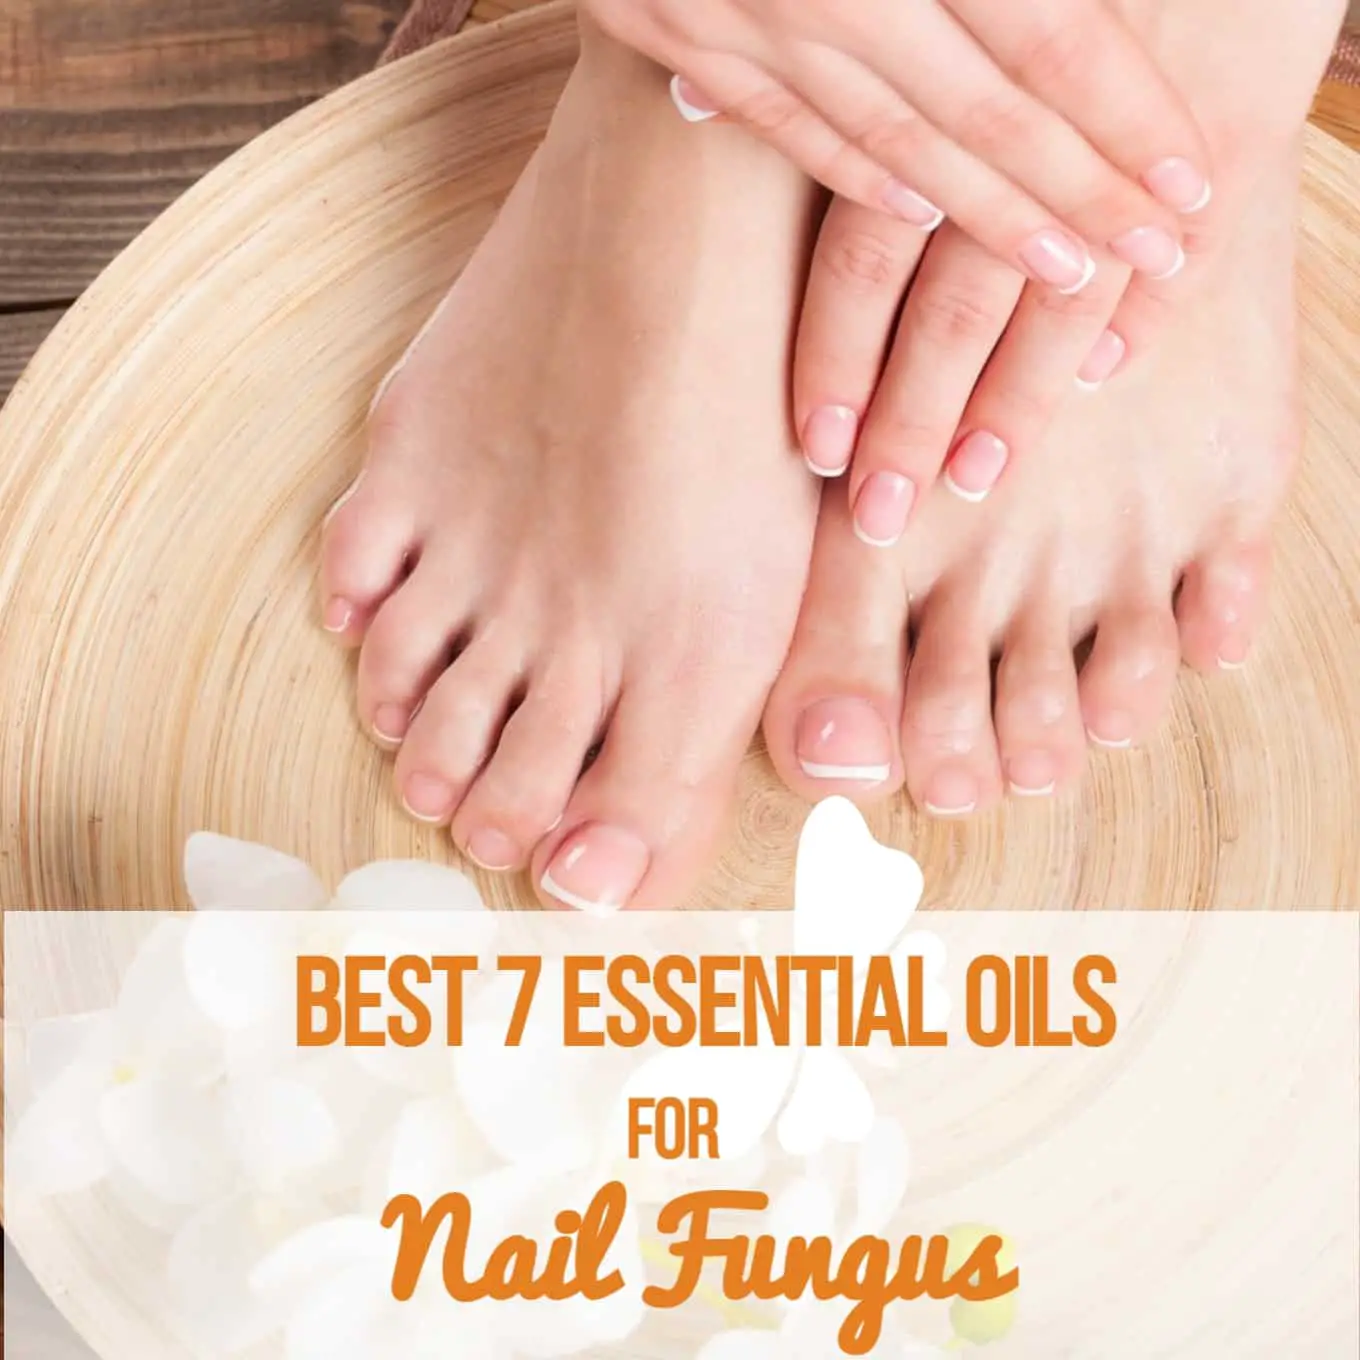 Best Essential Oils for Nail and Toenail Fungus